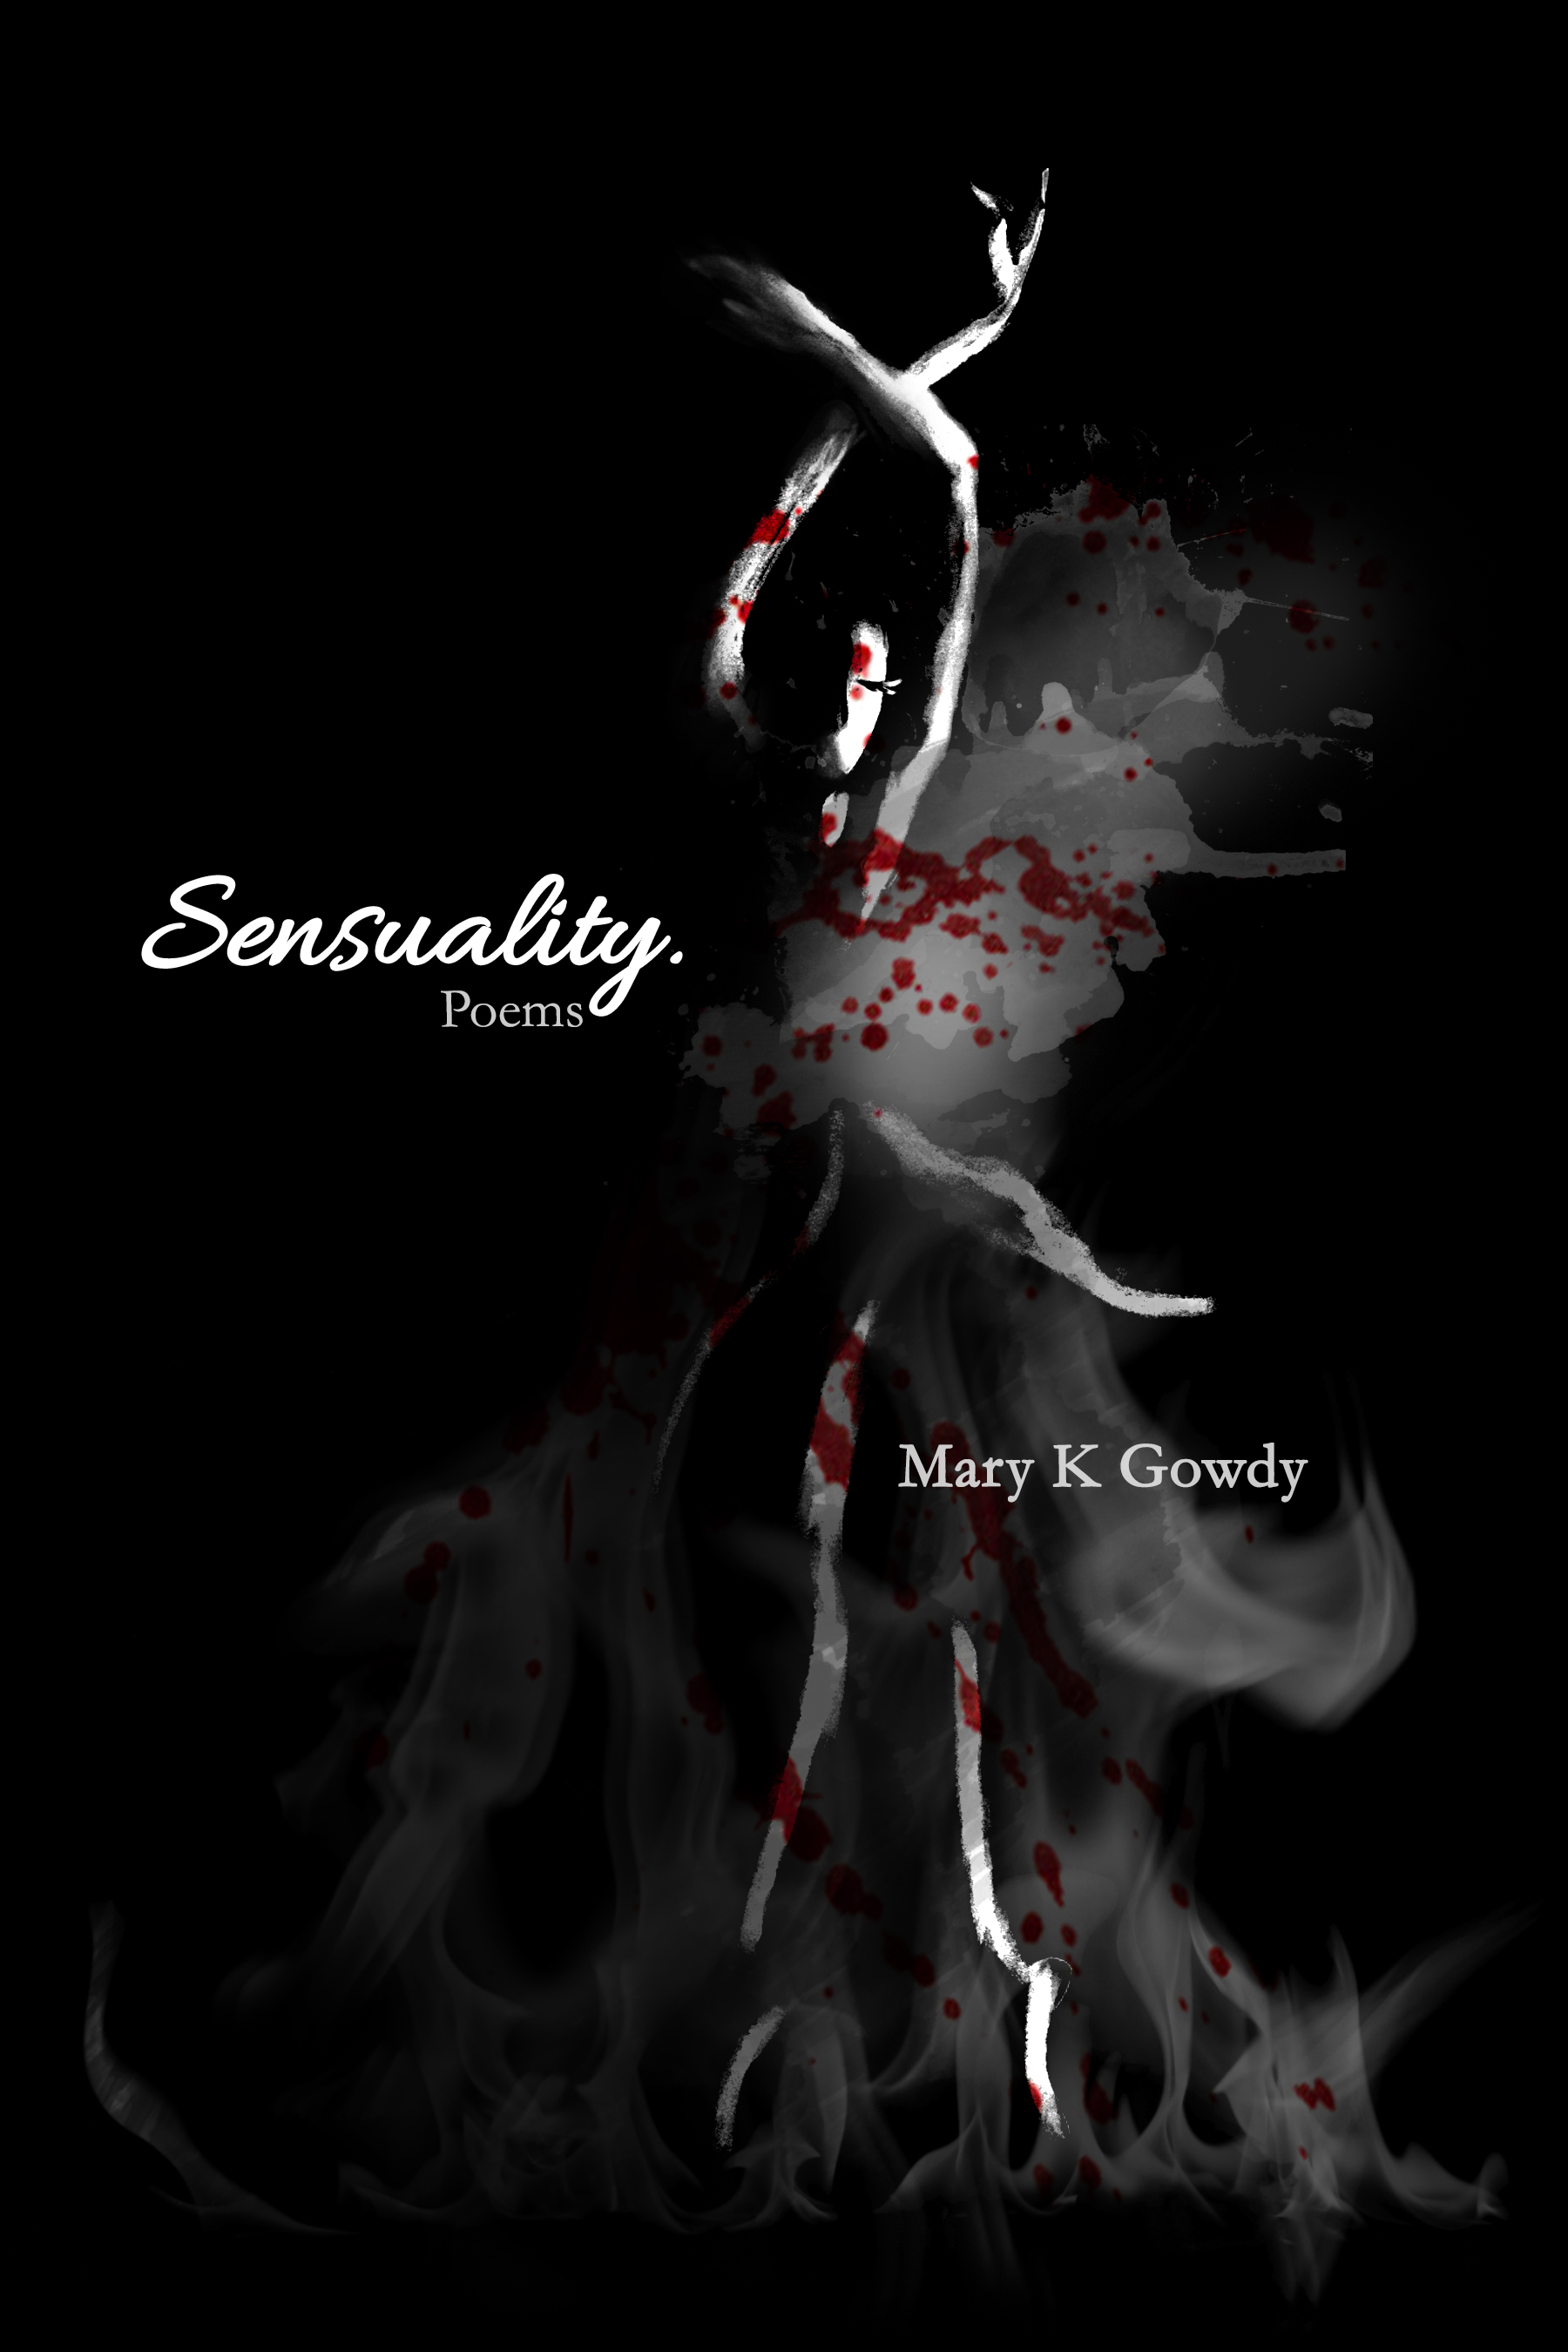 FREE: Sensuality. by Mary K Gowdy